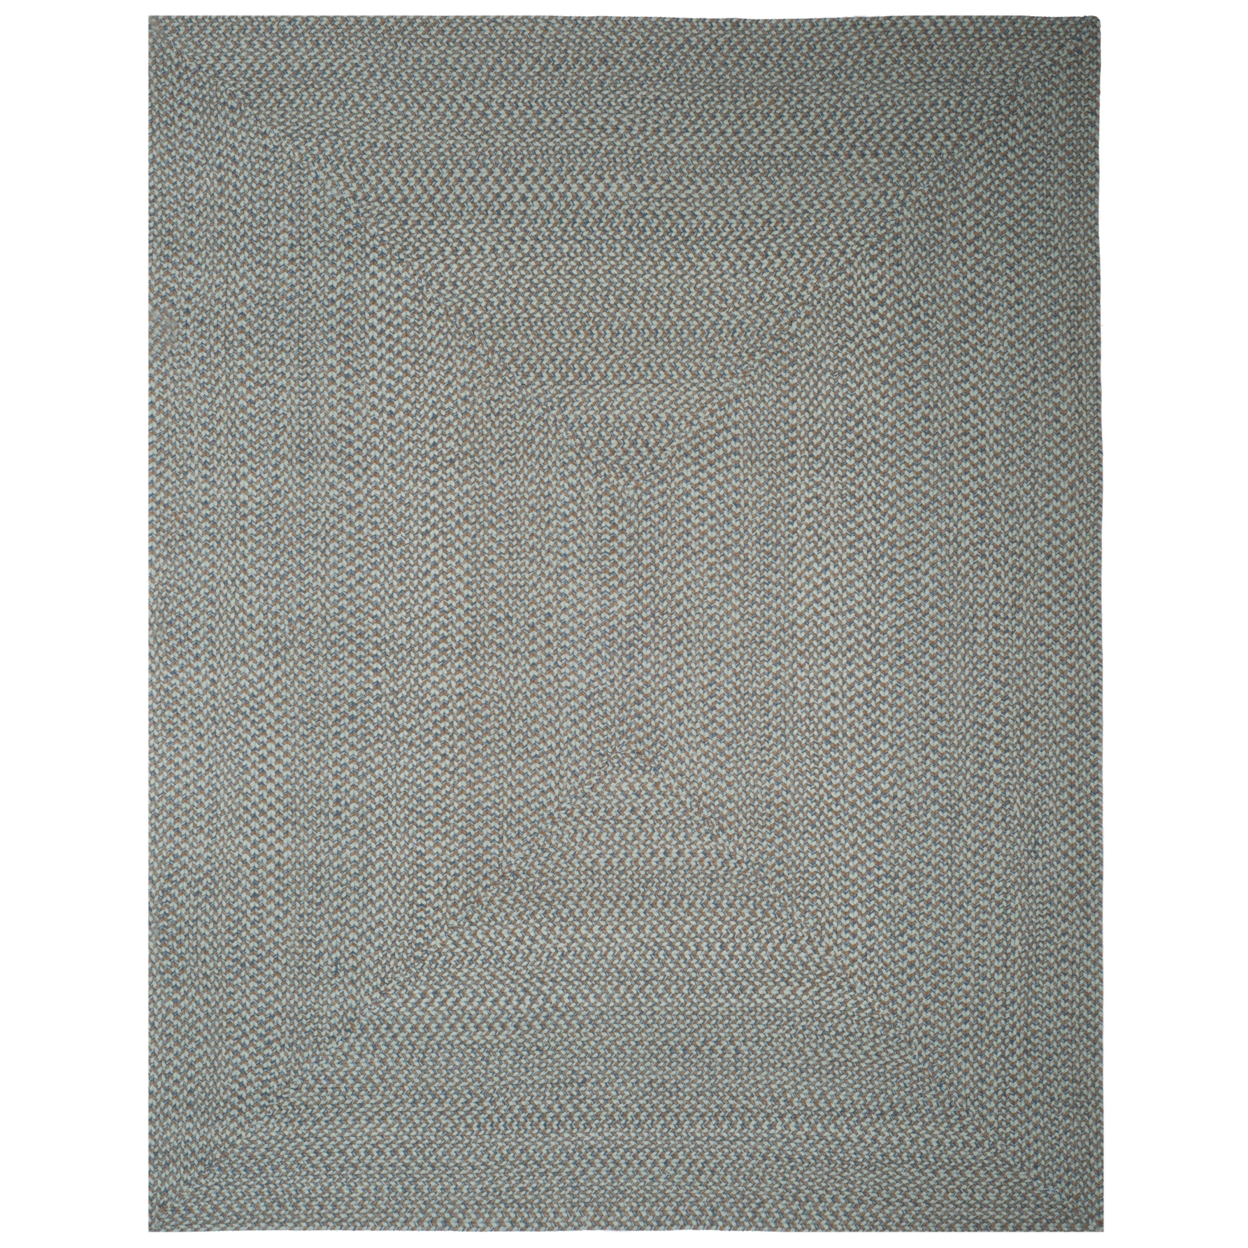 SAFAVIEH Braided Collection BRD170A Handwoven Multi Rug - 9' X 12'